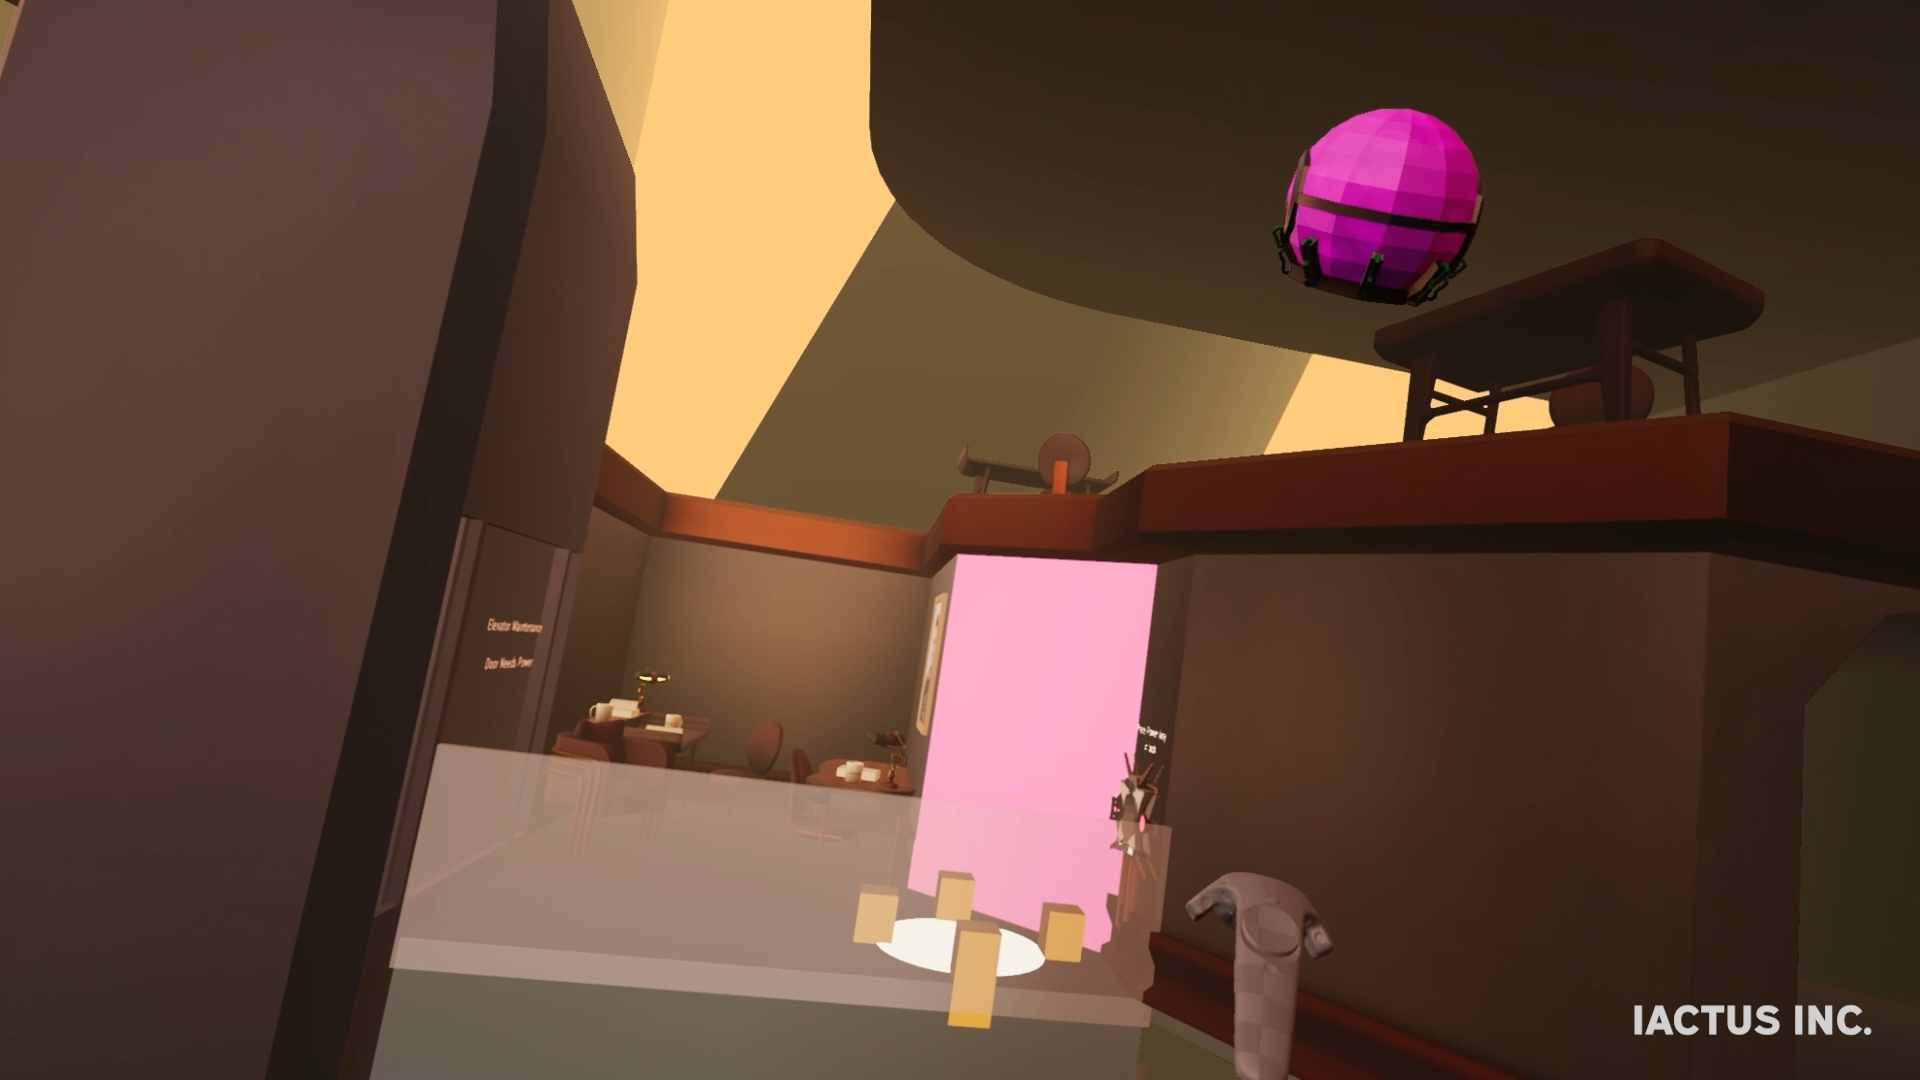 A screenshot of Iactus Inc. My final university project. A player throwing a vial at a wall, in a surrealist environment.